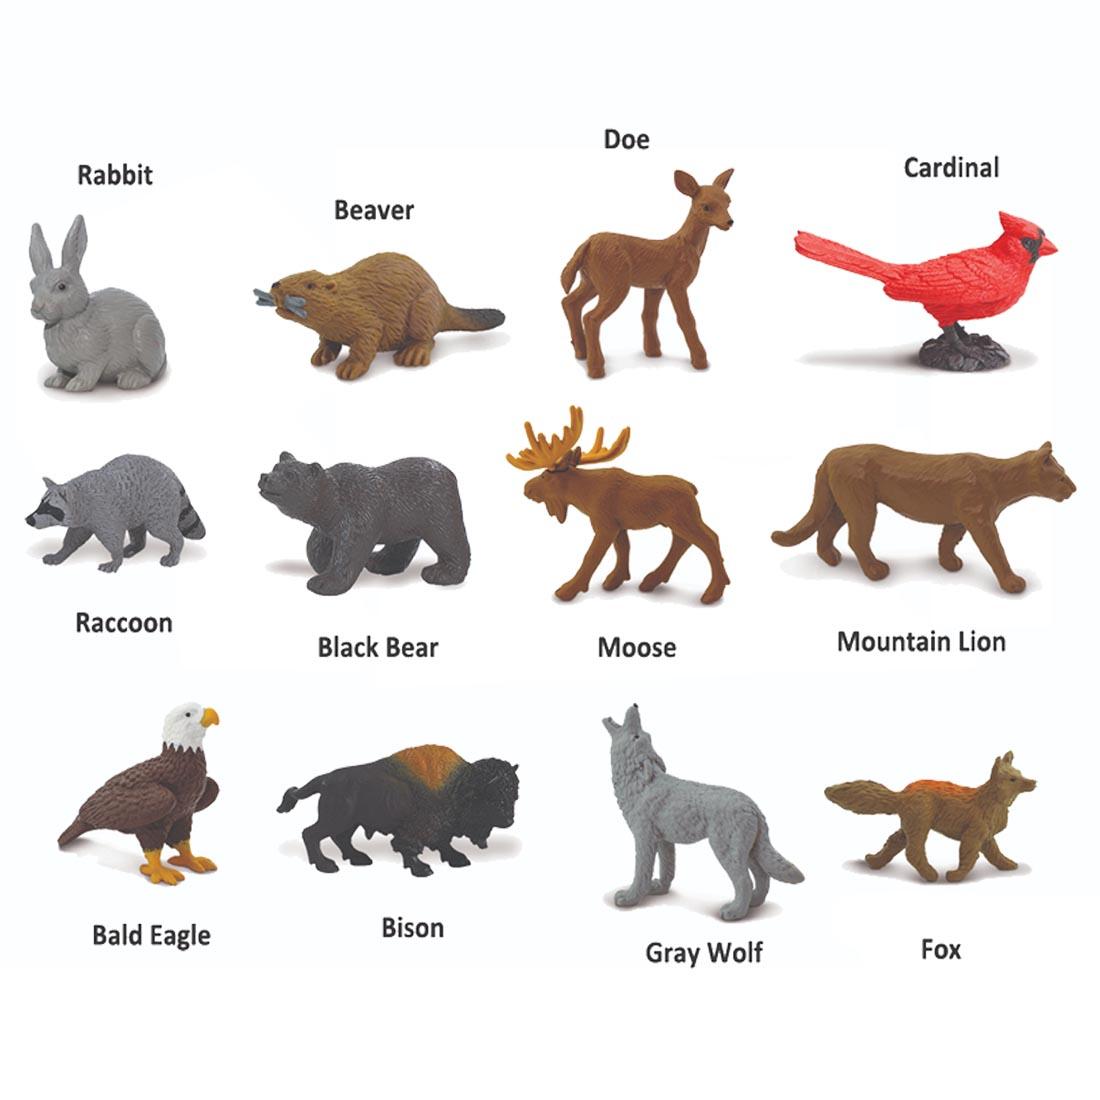 12 creatures from the Nature Figurine Set labeled with their names: rabbit, beaver, doe, cardinal, raccoon, black bear, moose, mountain lion, bald eagle, bison, gray wolf, fox